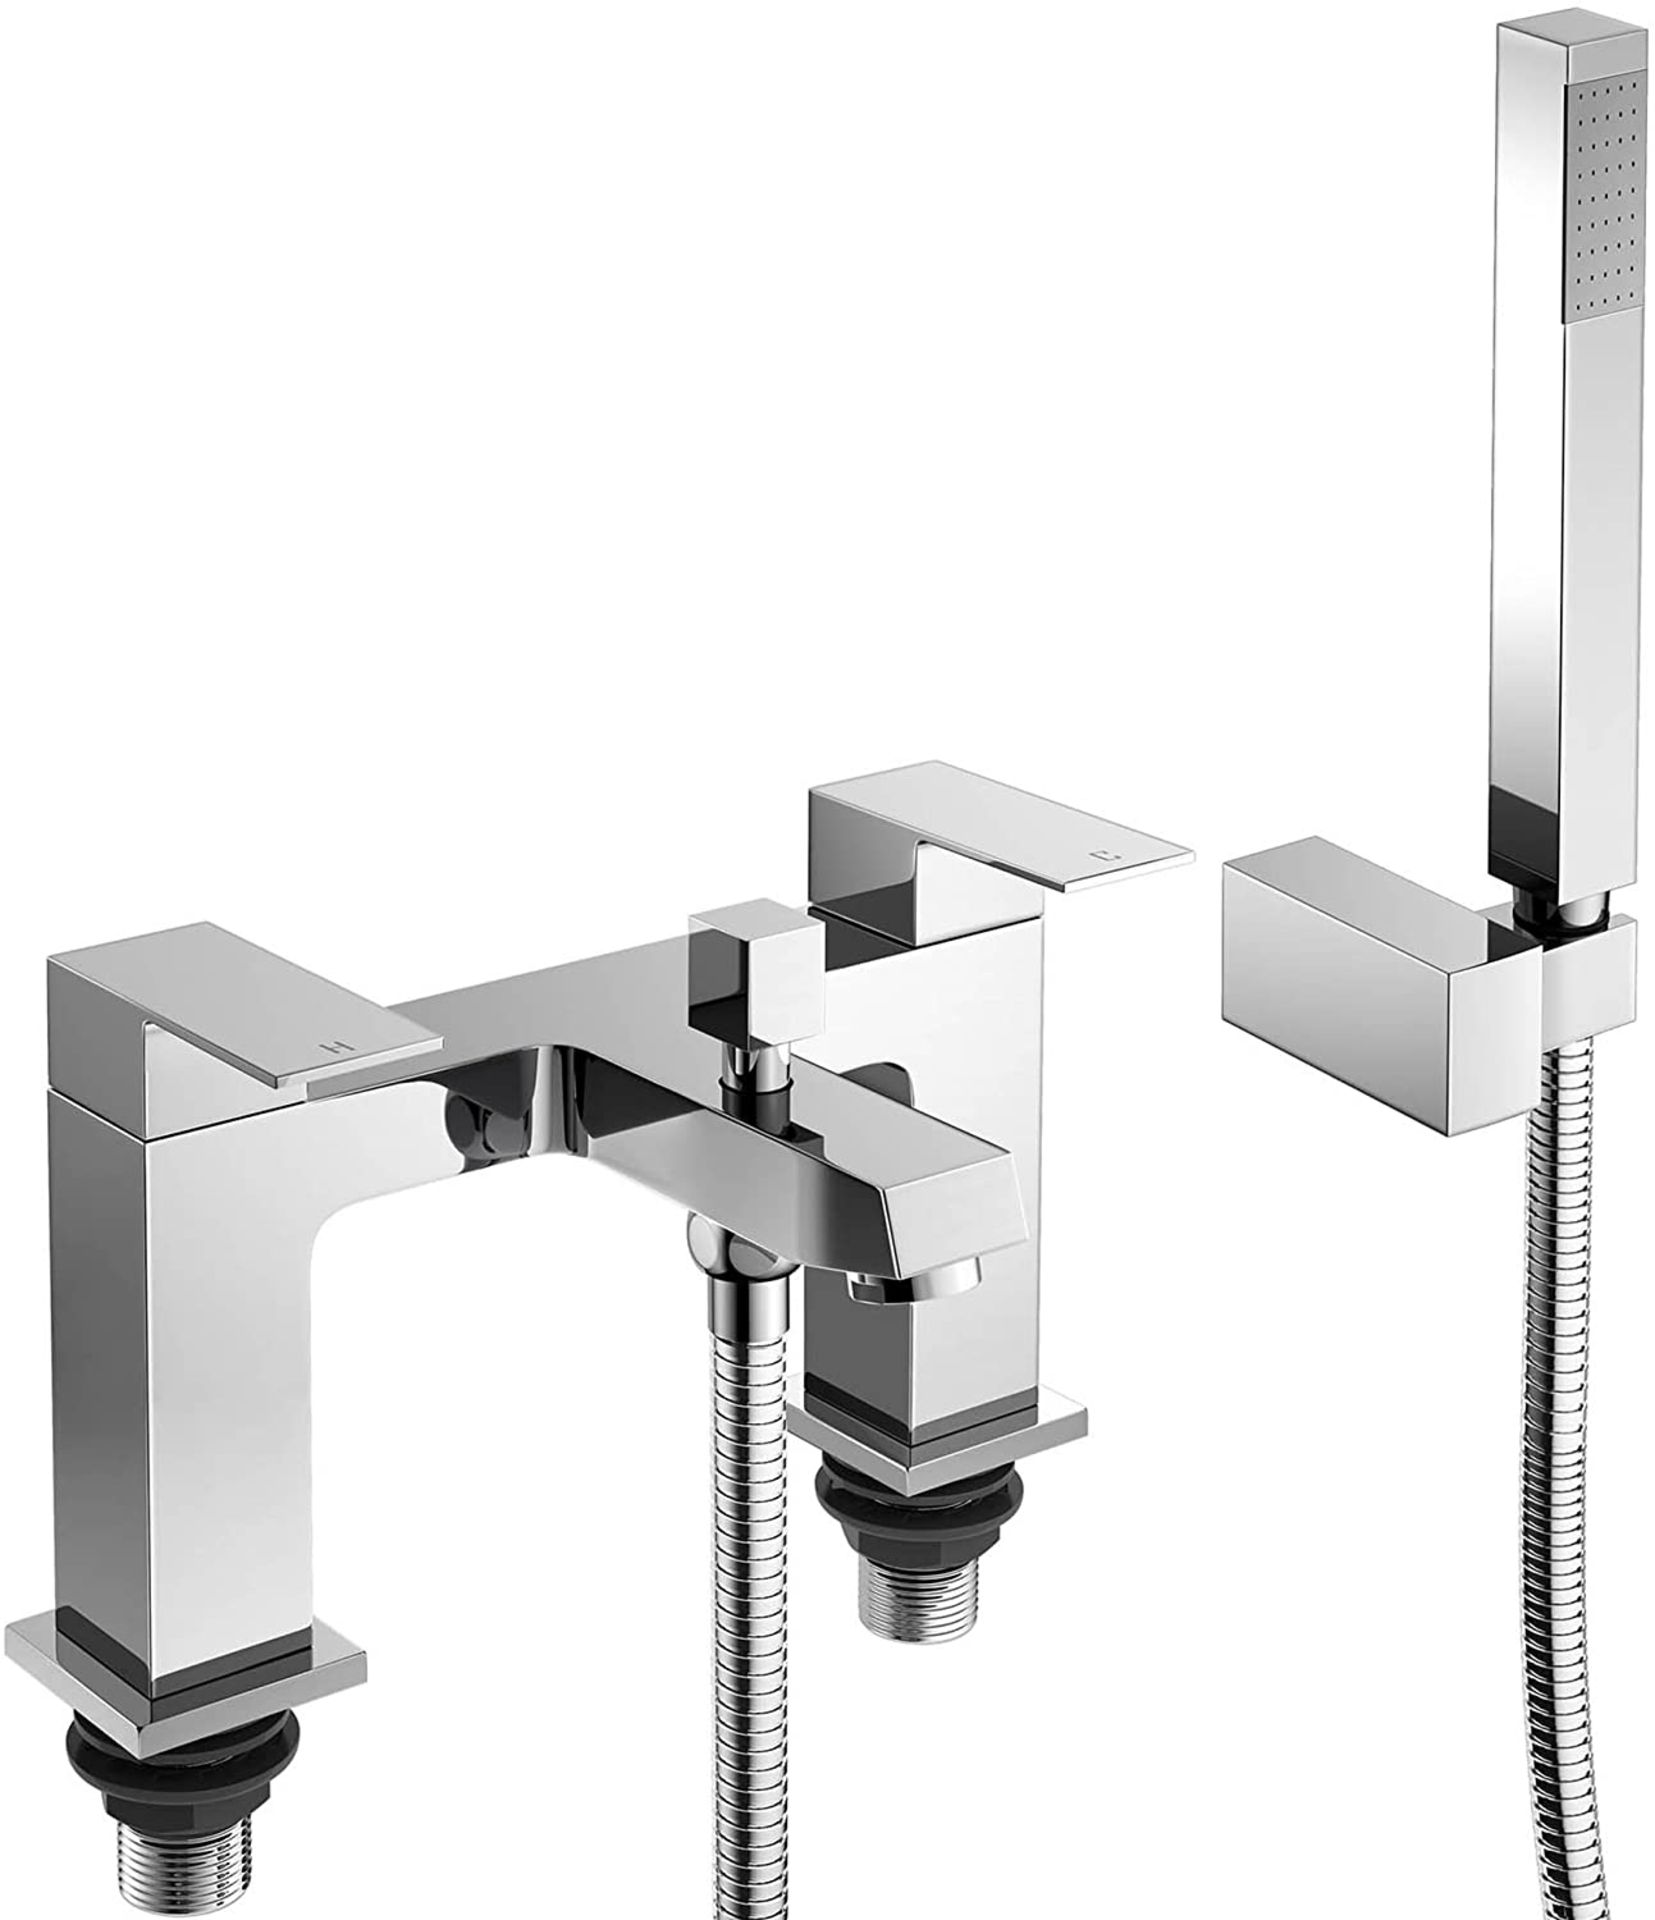 NEW & BOXED Chrome Bath Filler Mixer Tap Hand Held Shower Head Handset Set TB3085. Chrome plate... - Image 3 of 3